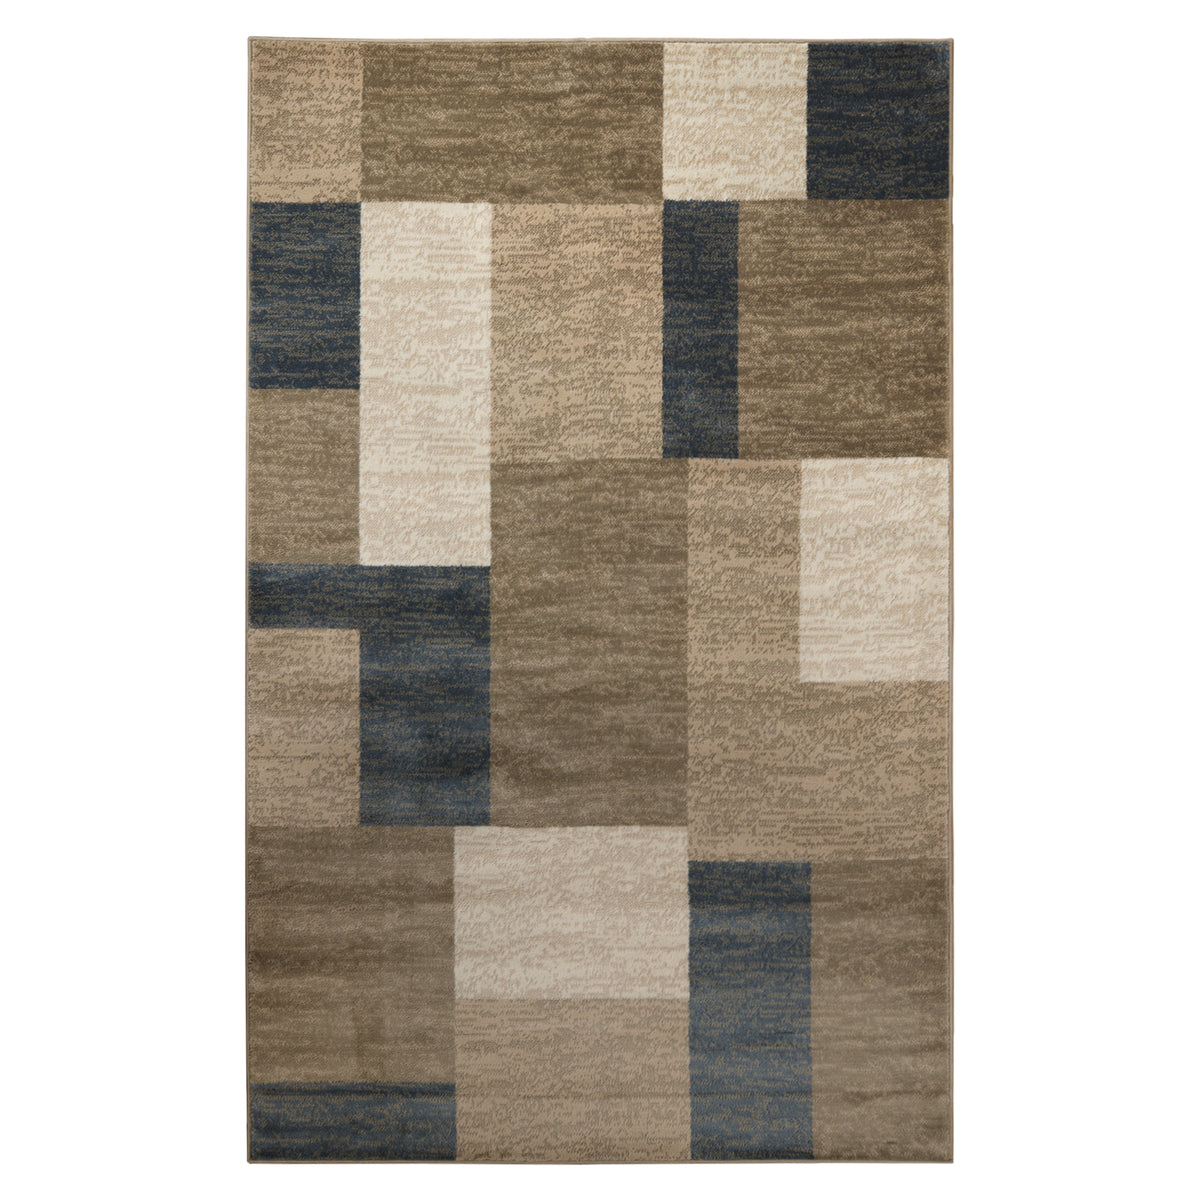 Clifton Geometric Color Block Plush Indoor Area Rug or Runner Rug